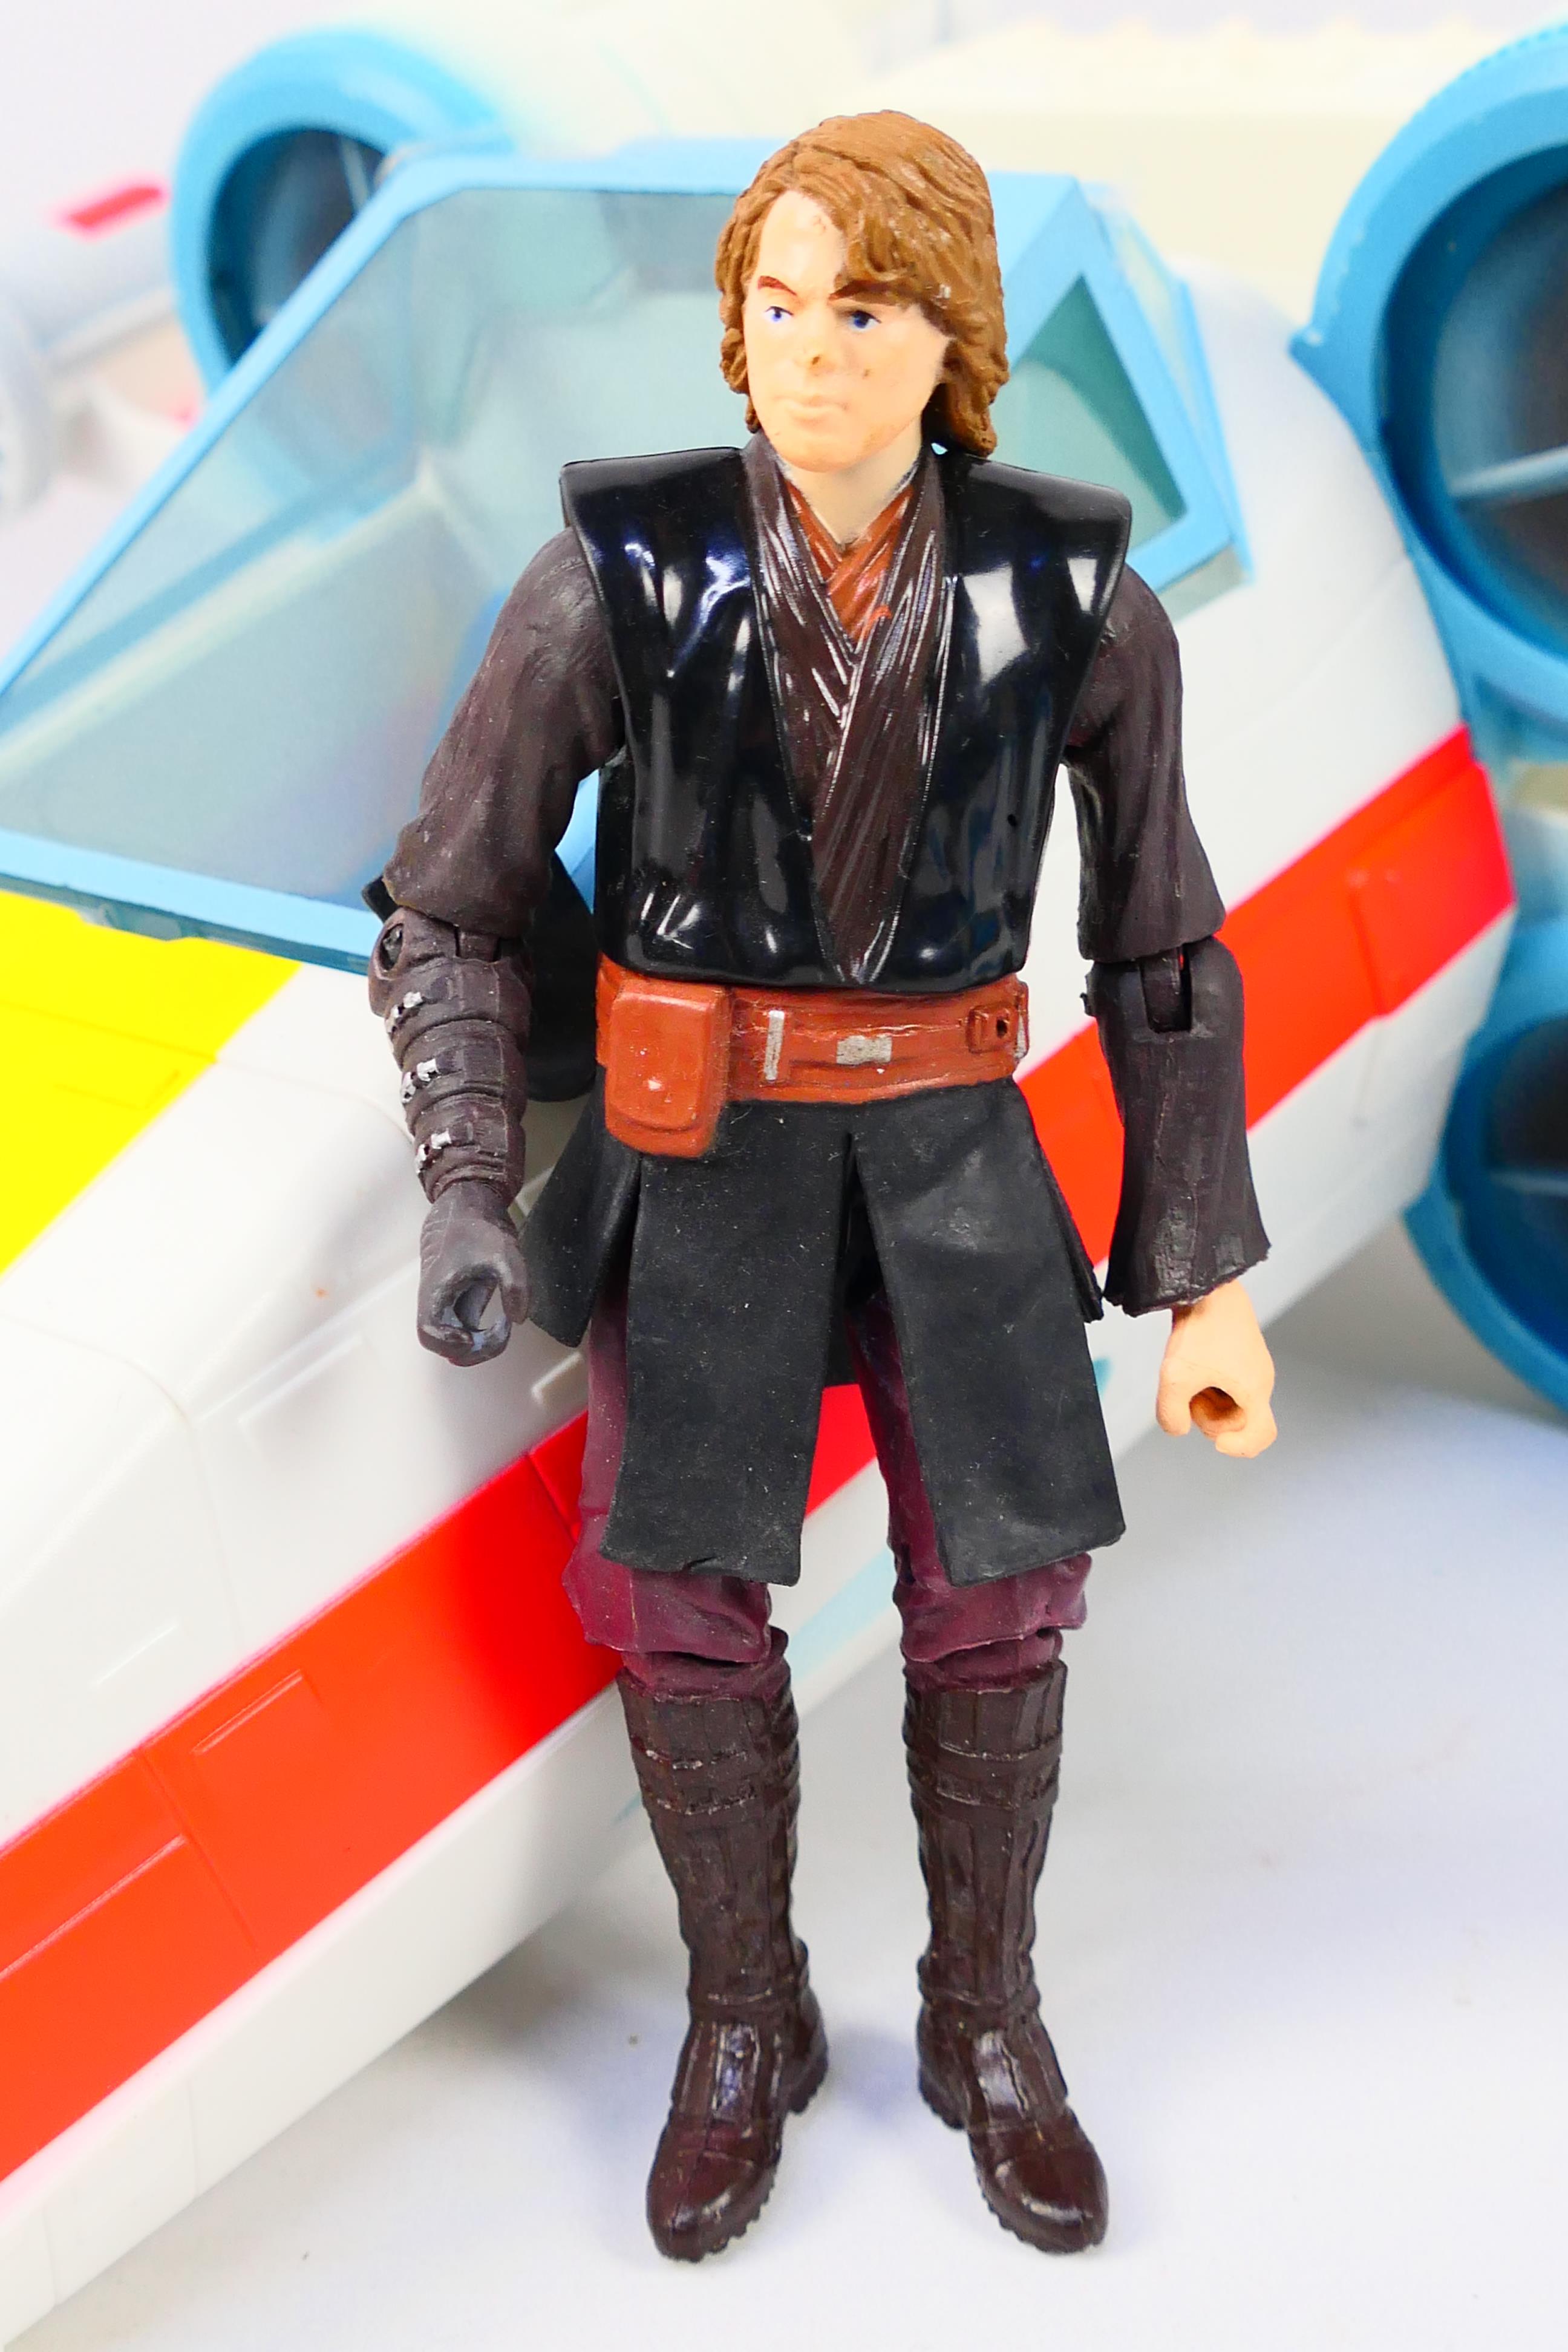 Hasbro - Star Wars - A Star Wars Millennium Falcon Plat Set with figures including Hans, - Image 12 of 13